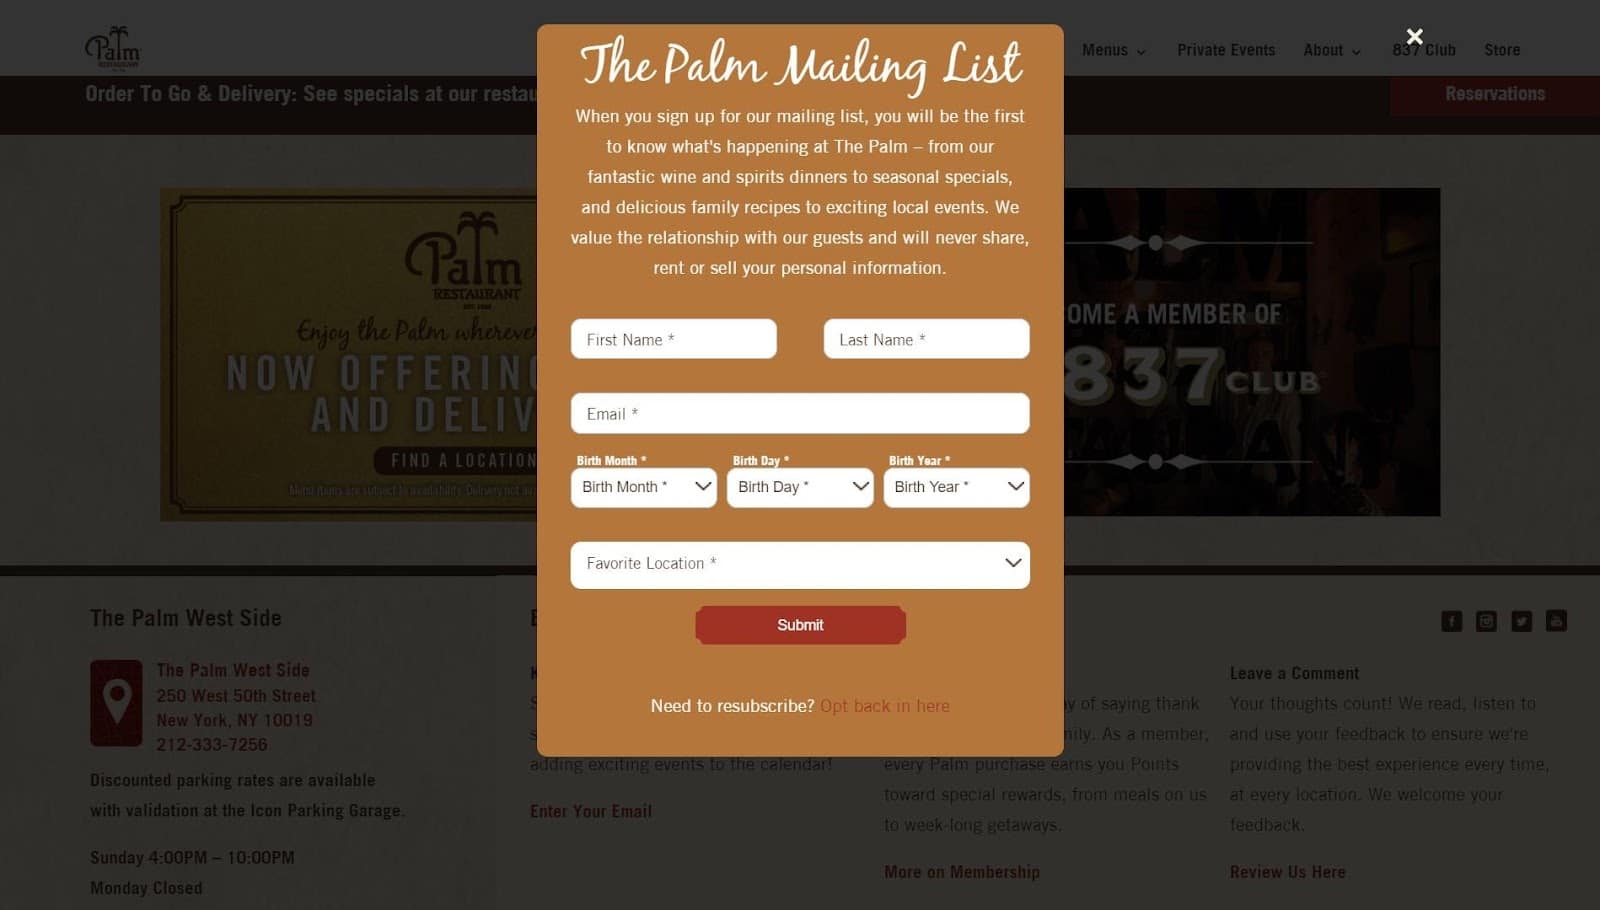 The pop up from Palm Restaurant’s website - the background has a dark overlay to hide the website.